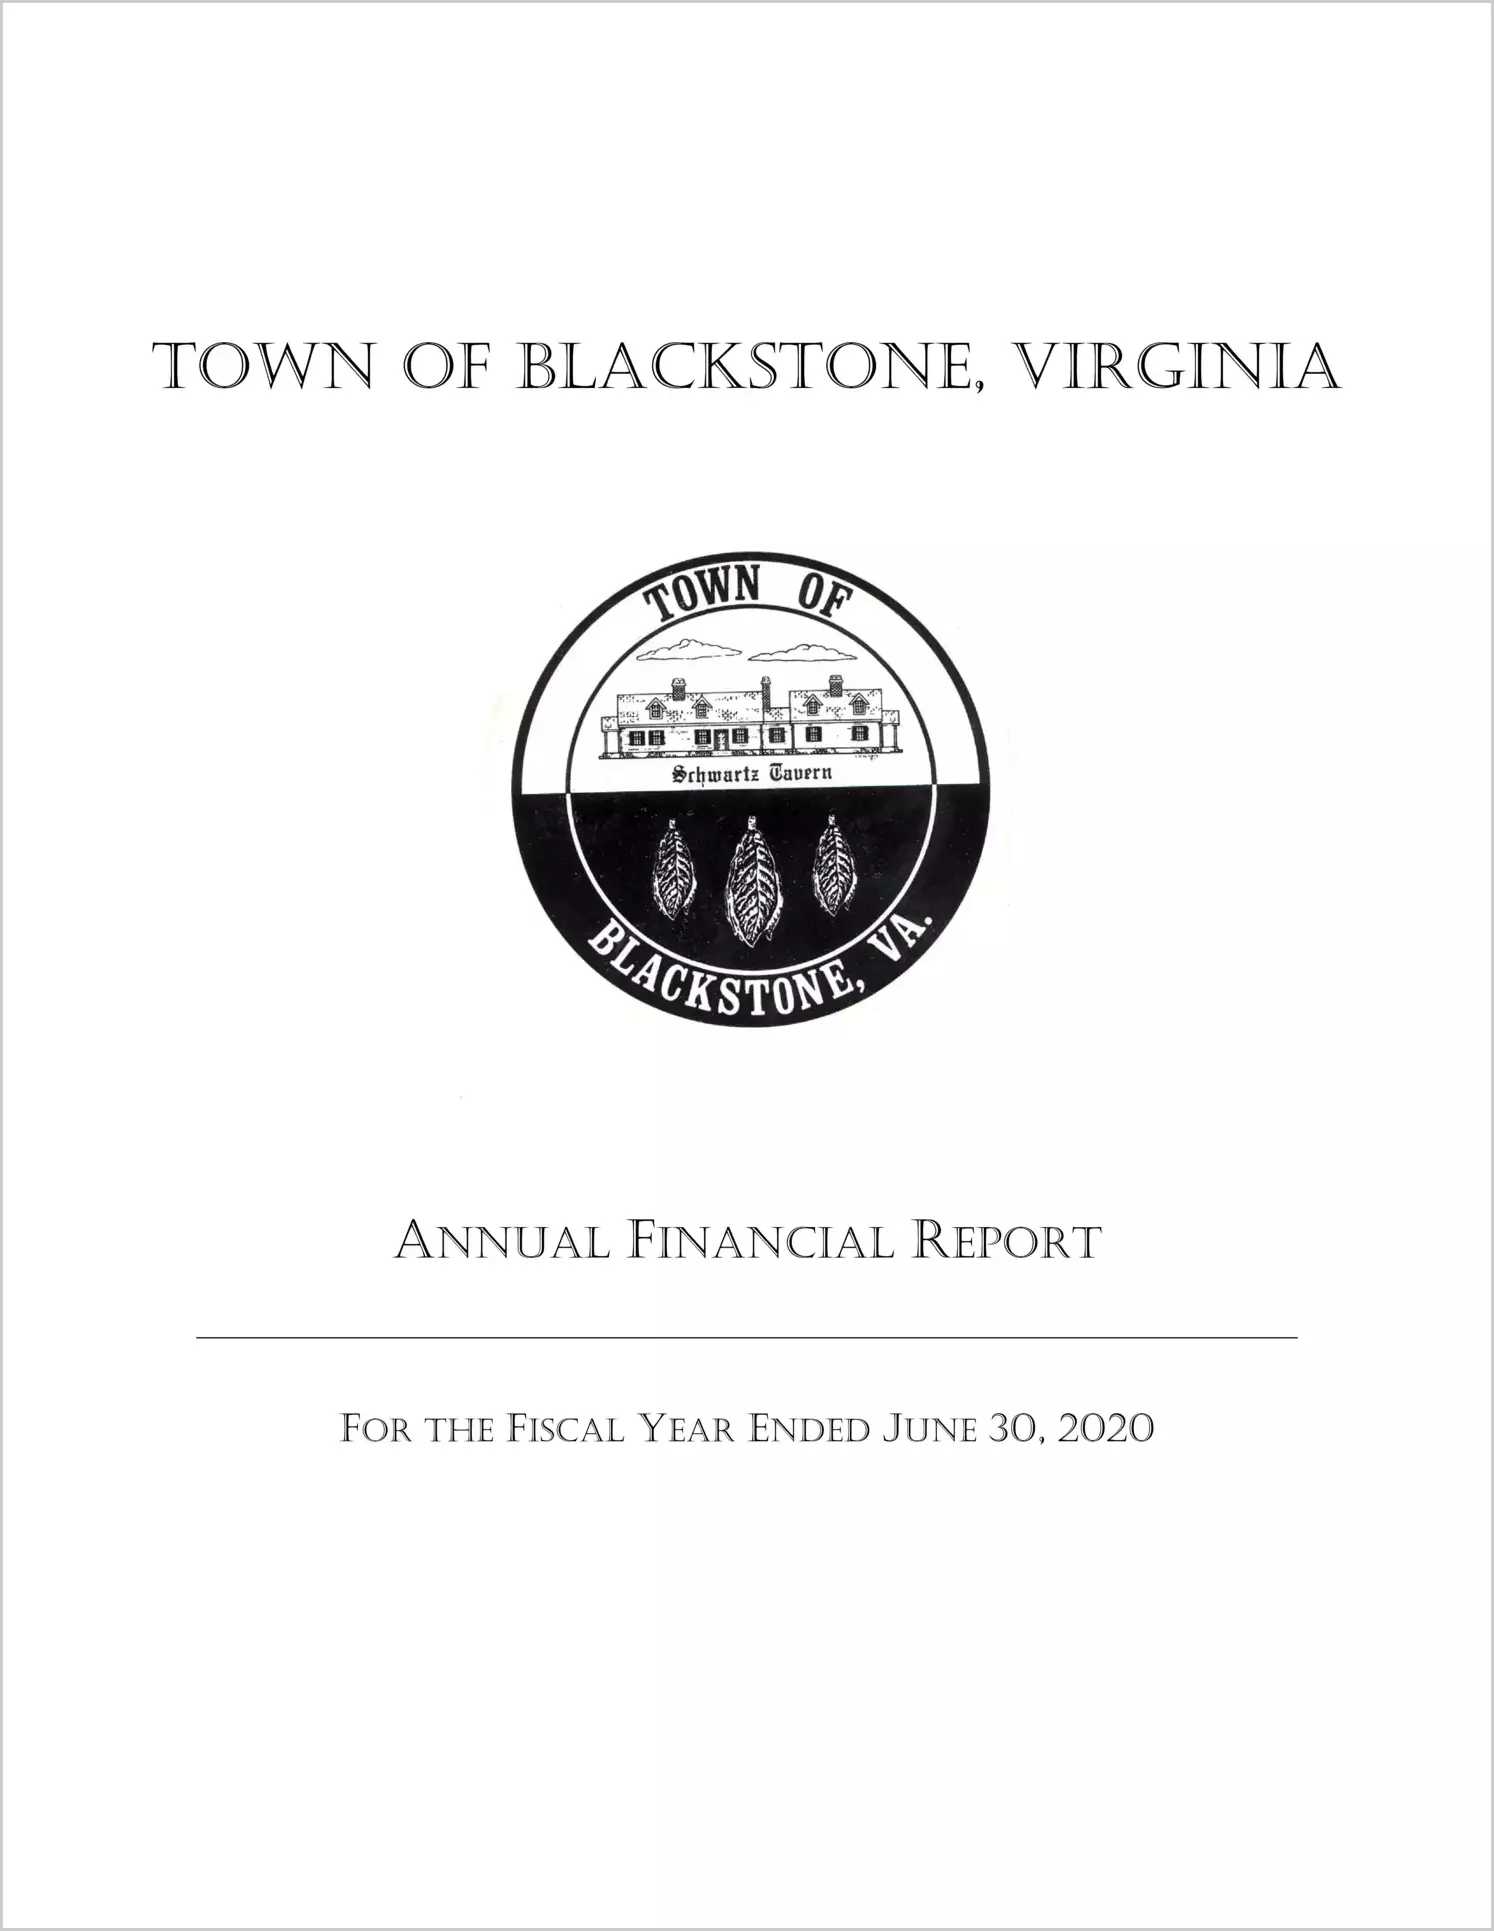 2020 Annual Financial Report for Town of Blackstone